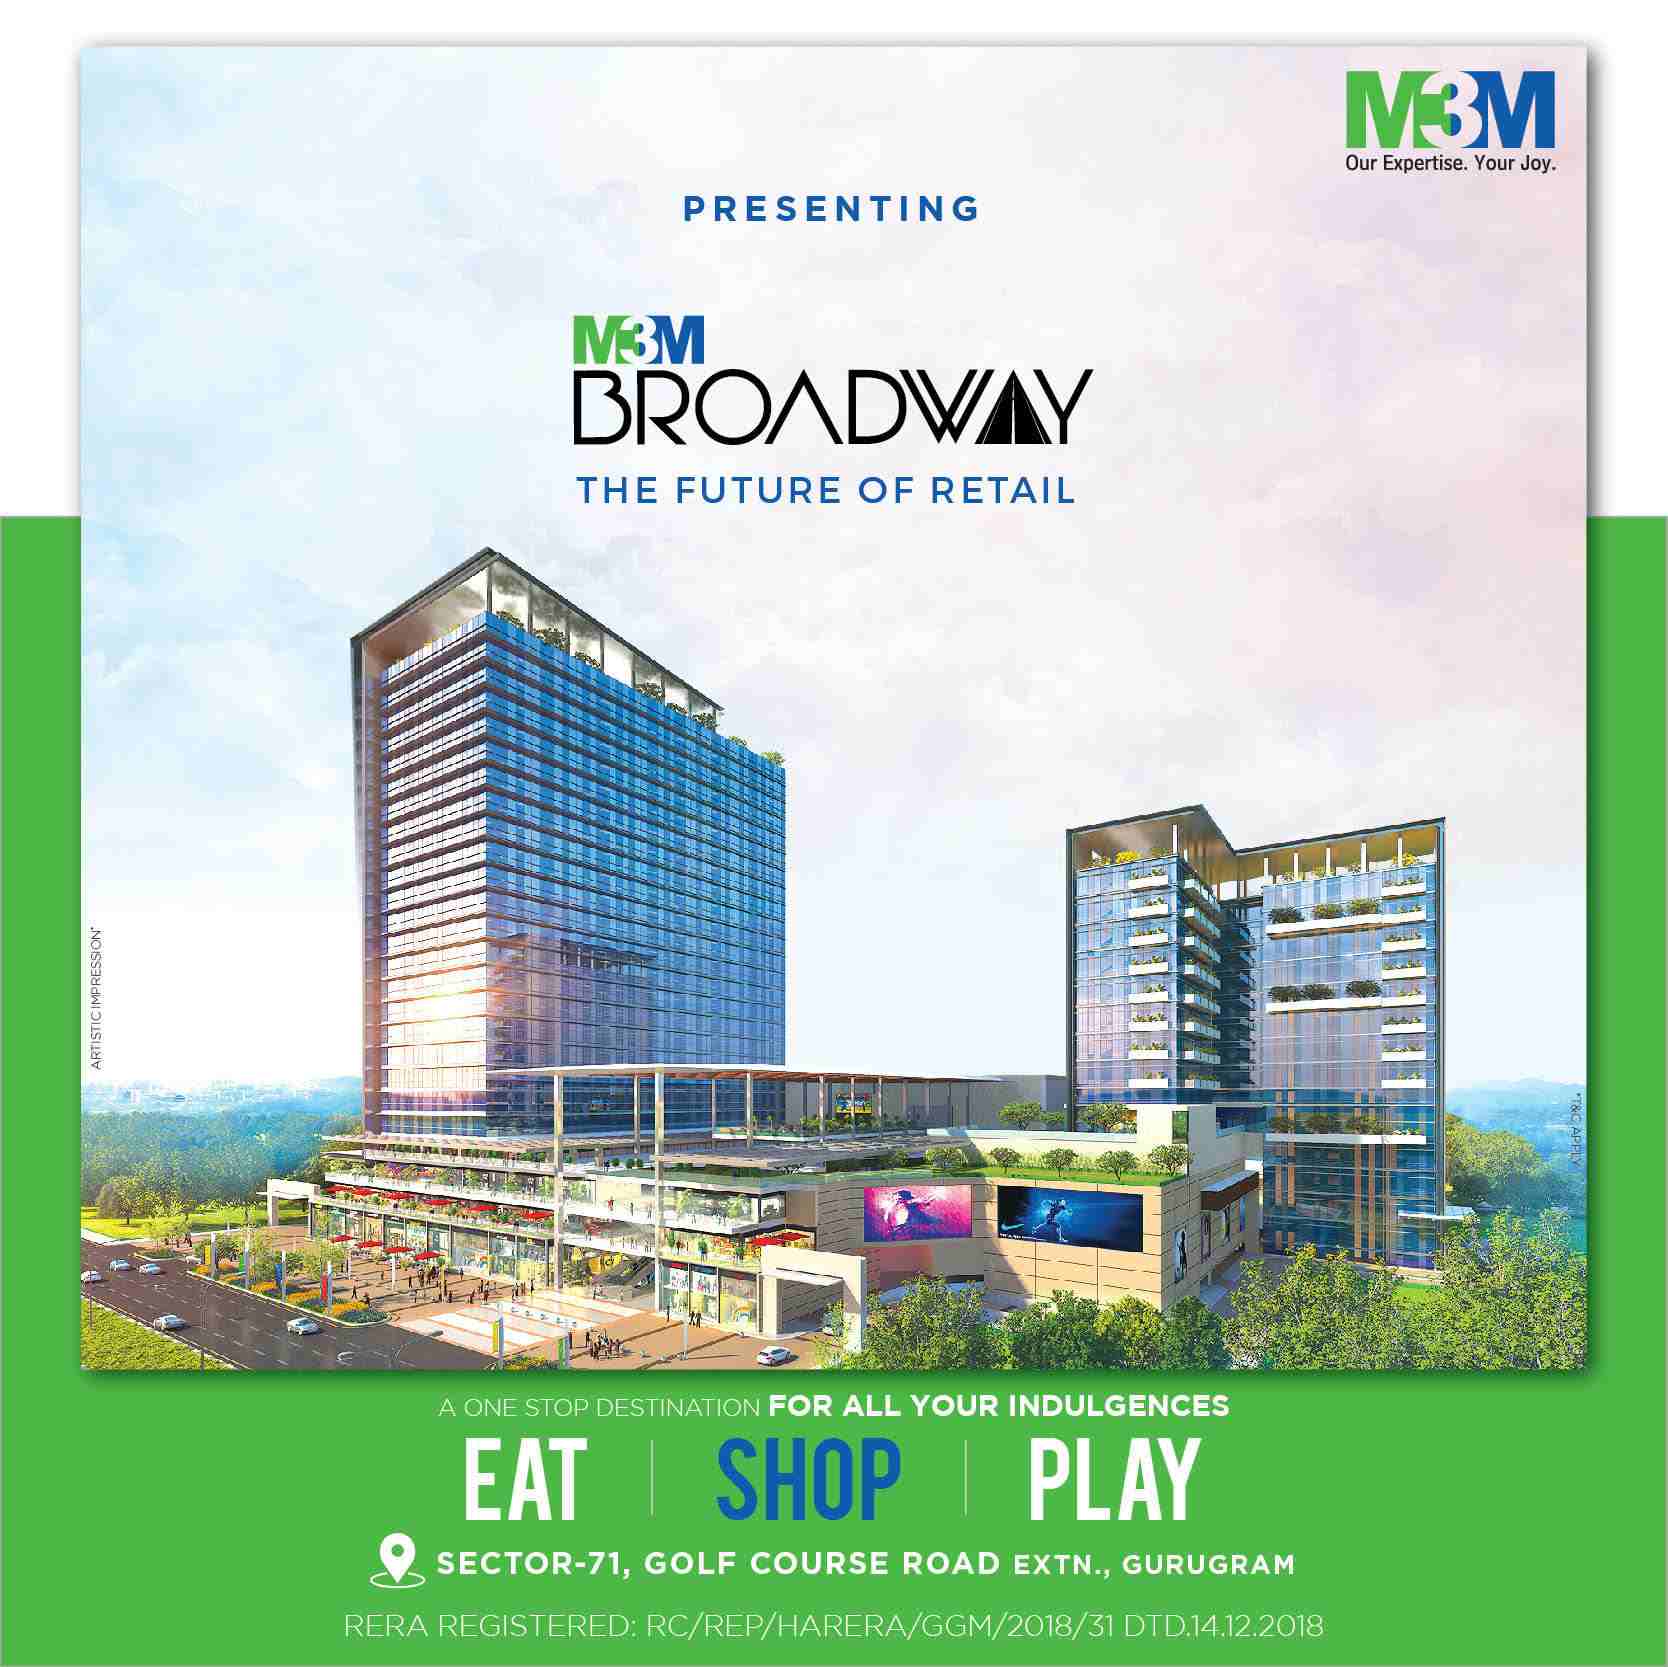 M3M Broadway - One stop destination for F&B, Retail & Entertainment in Gurugram Update